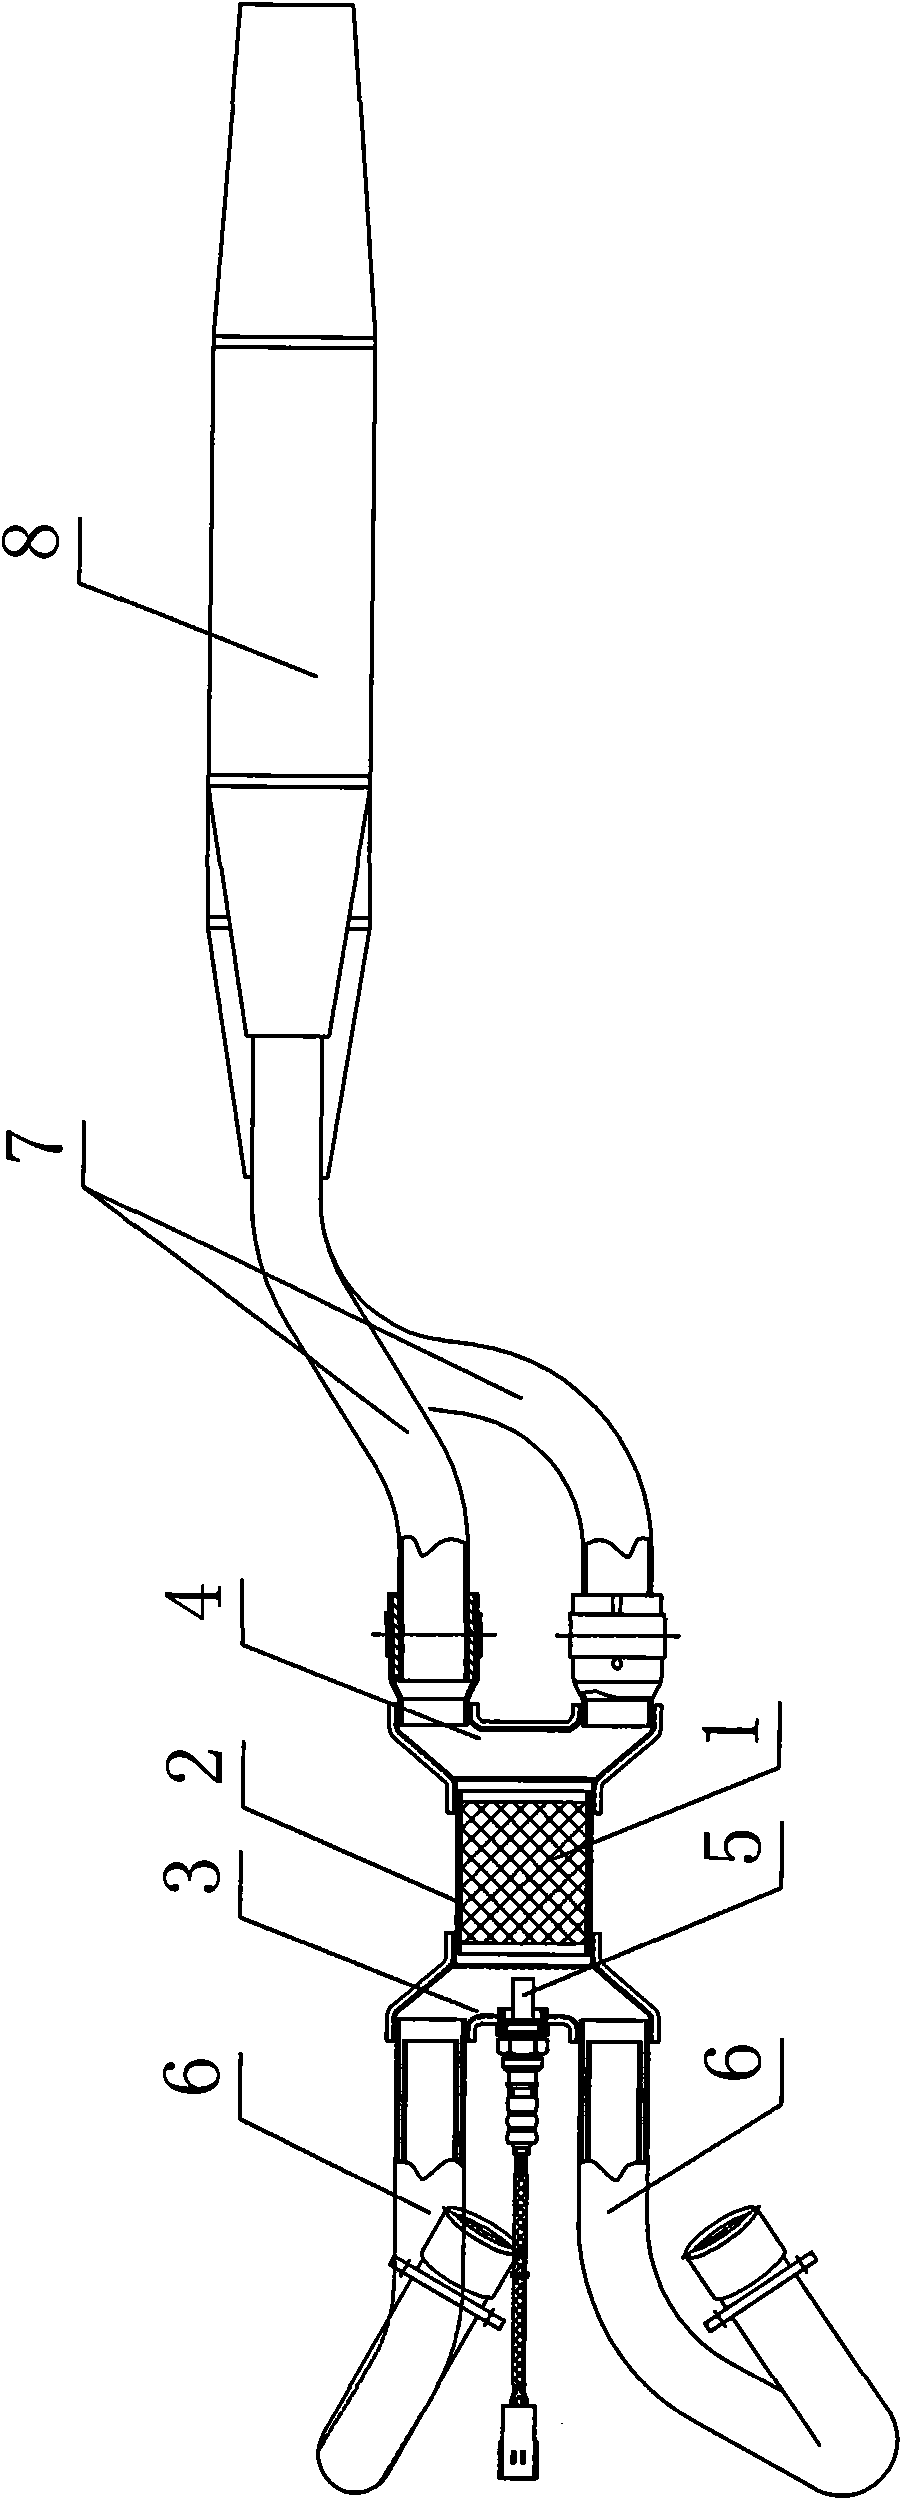 Double-row muffler of motorcycle with engine management system